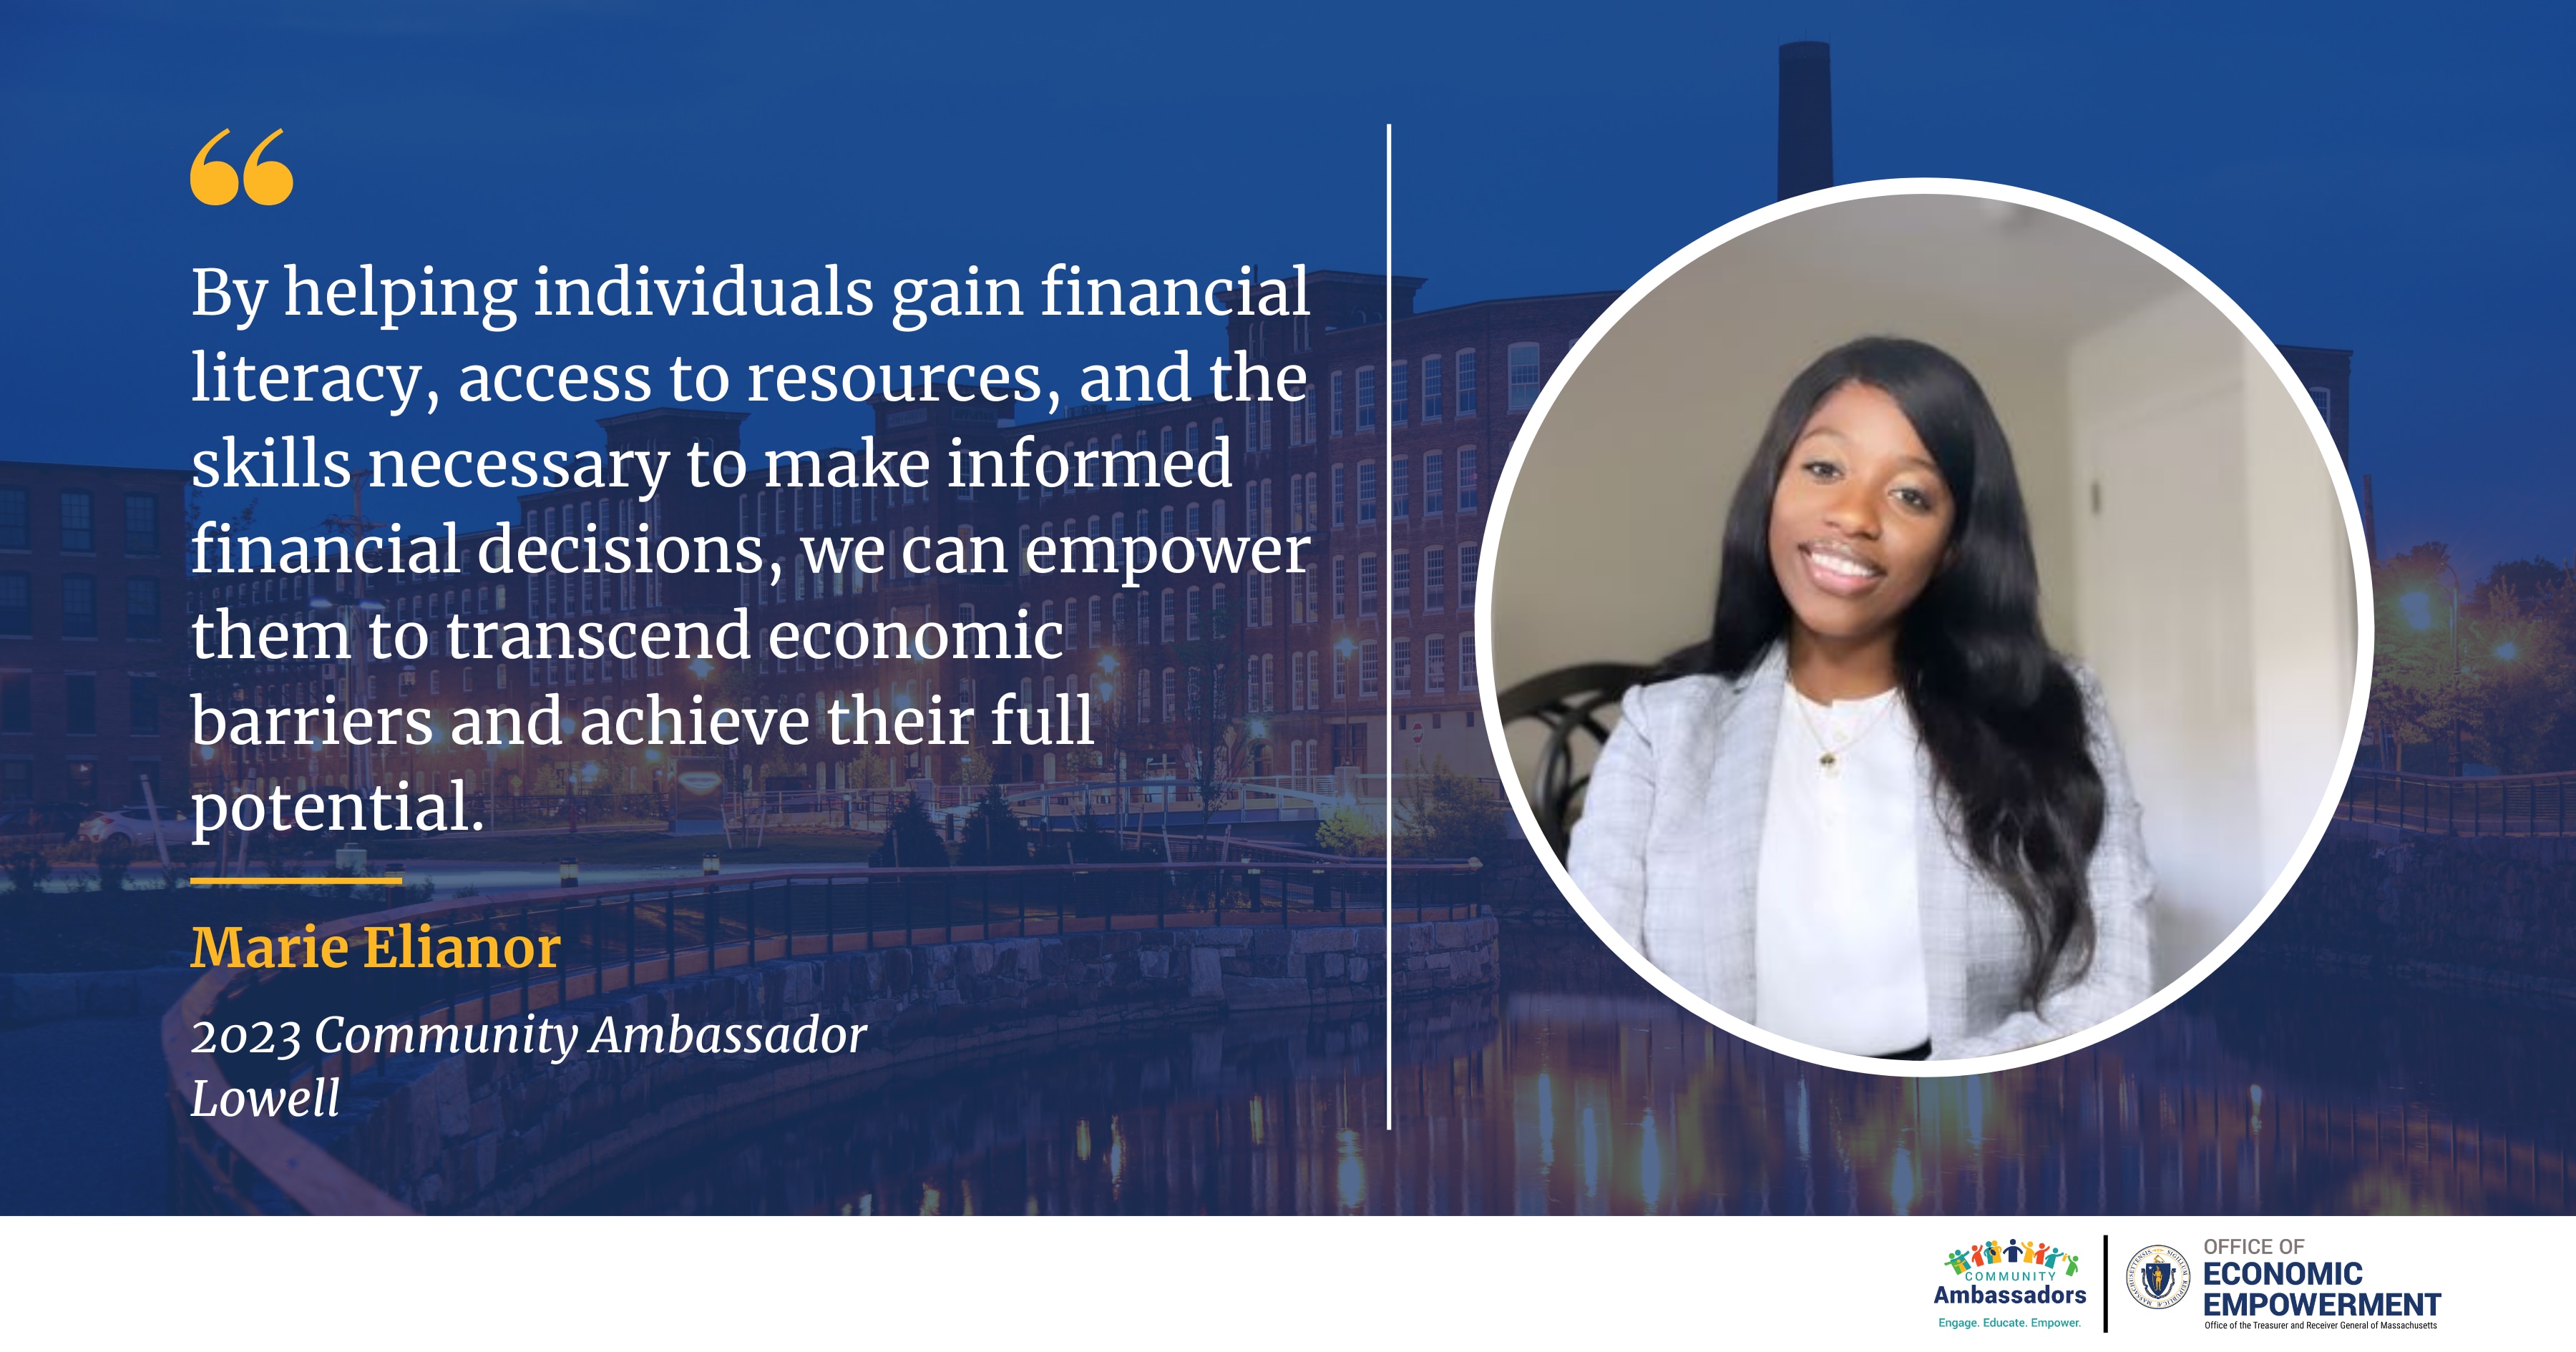 A photo of Marie Elianor with text reading: "By helping individuals gain financial literacy, access to resources, and the skills necessary to make informed financial decisions, we can empower them to transcend economic barriers and achieve their full potential."